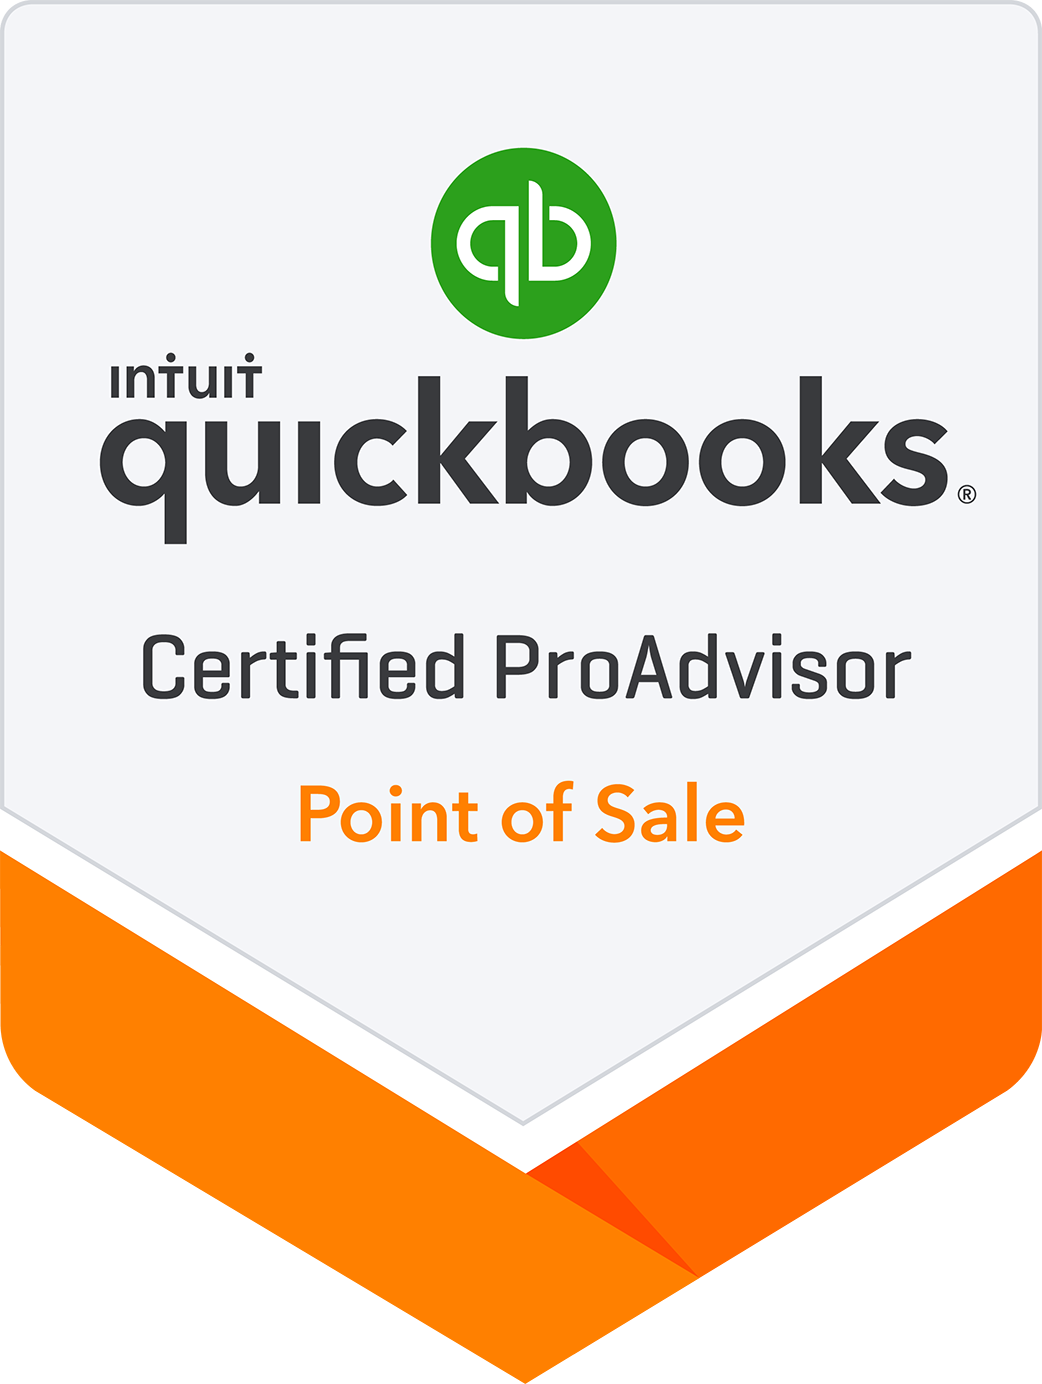 Certified in Intuit QuickBooks Point of Sale desktop versions  19.0, 12.0, 10.0, 8.0, and 6.0 and someone who sells and services the product. No certification was offered for the versions in between or after such as 18.0.